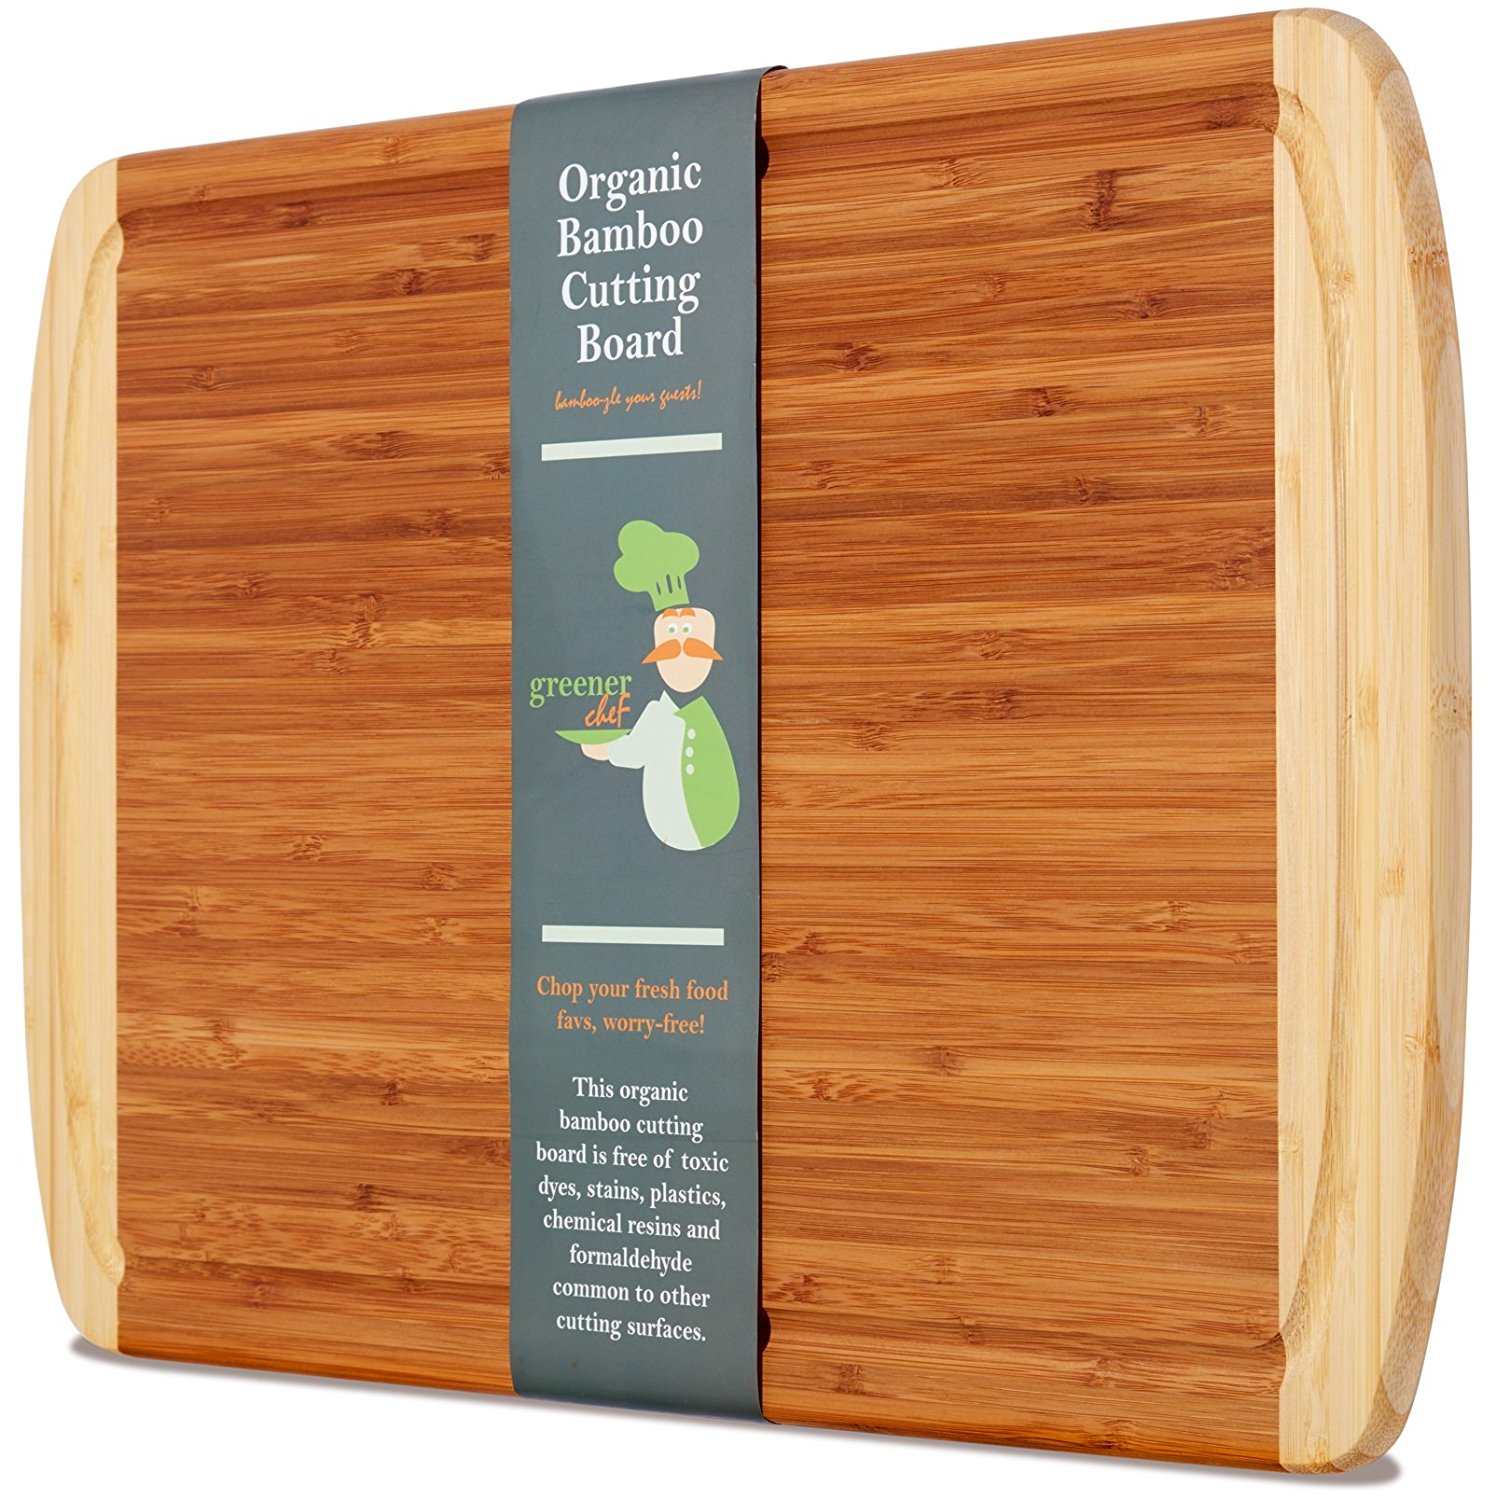 Greener Chef Extra Large Organic Bamboo Cutting Board with NEW CRACK-PREVENTION TECHNOLOGY & LIFETIME REPLACEMENT WARRANTY - Best Wood Cutting Boards for Kitchen - Juice Groove for Meat - FDA Approved